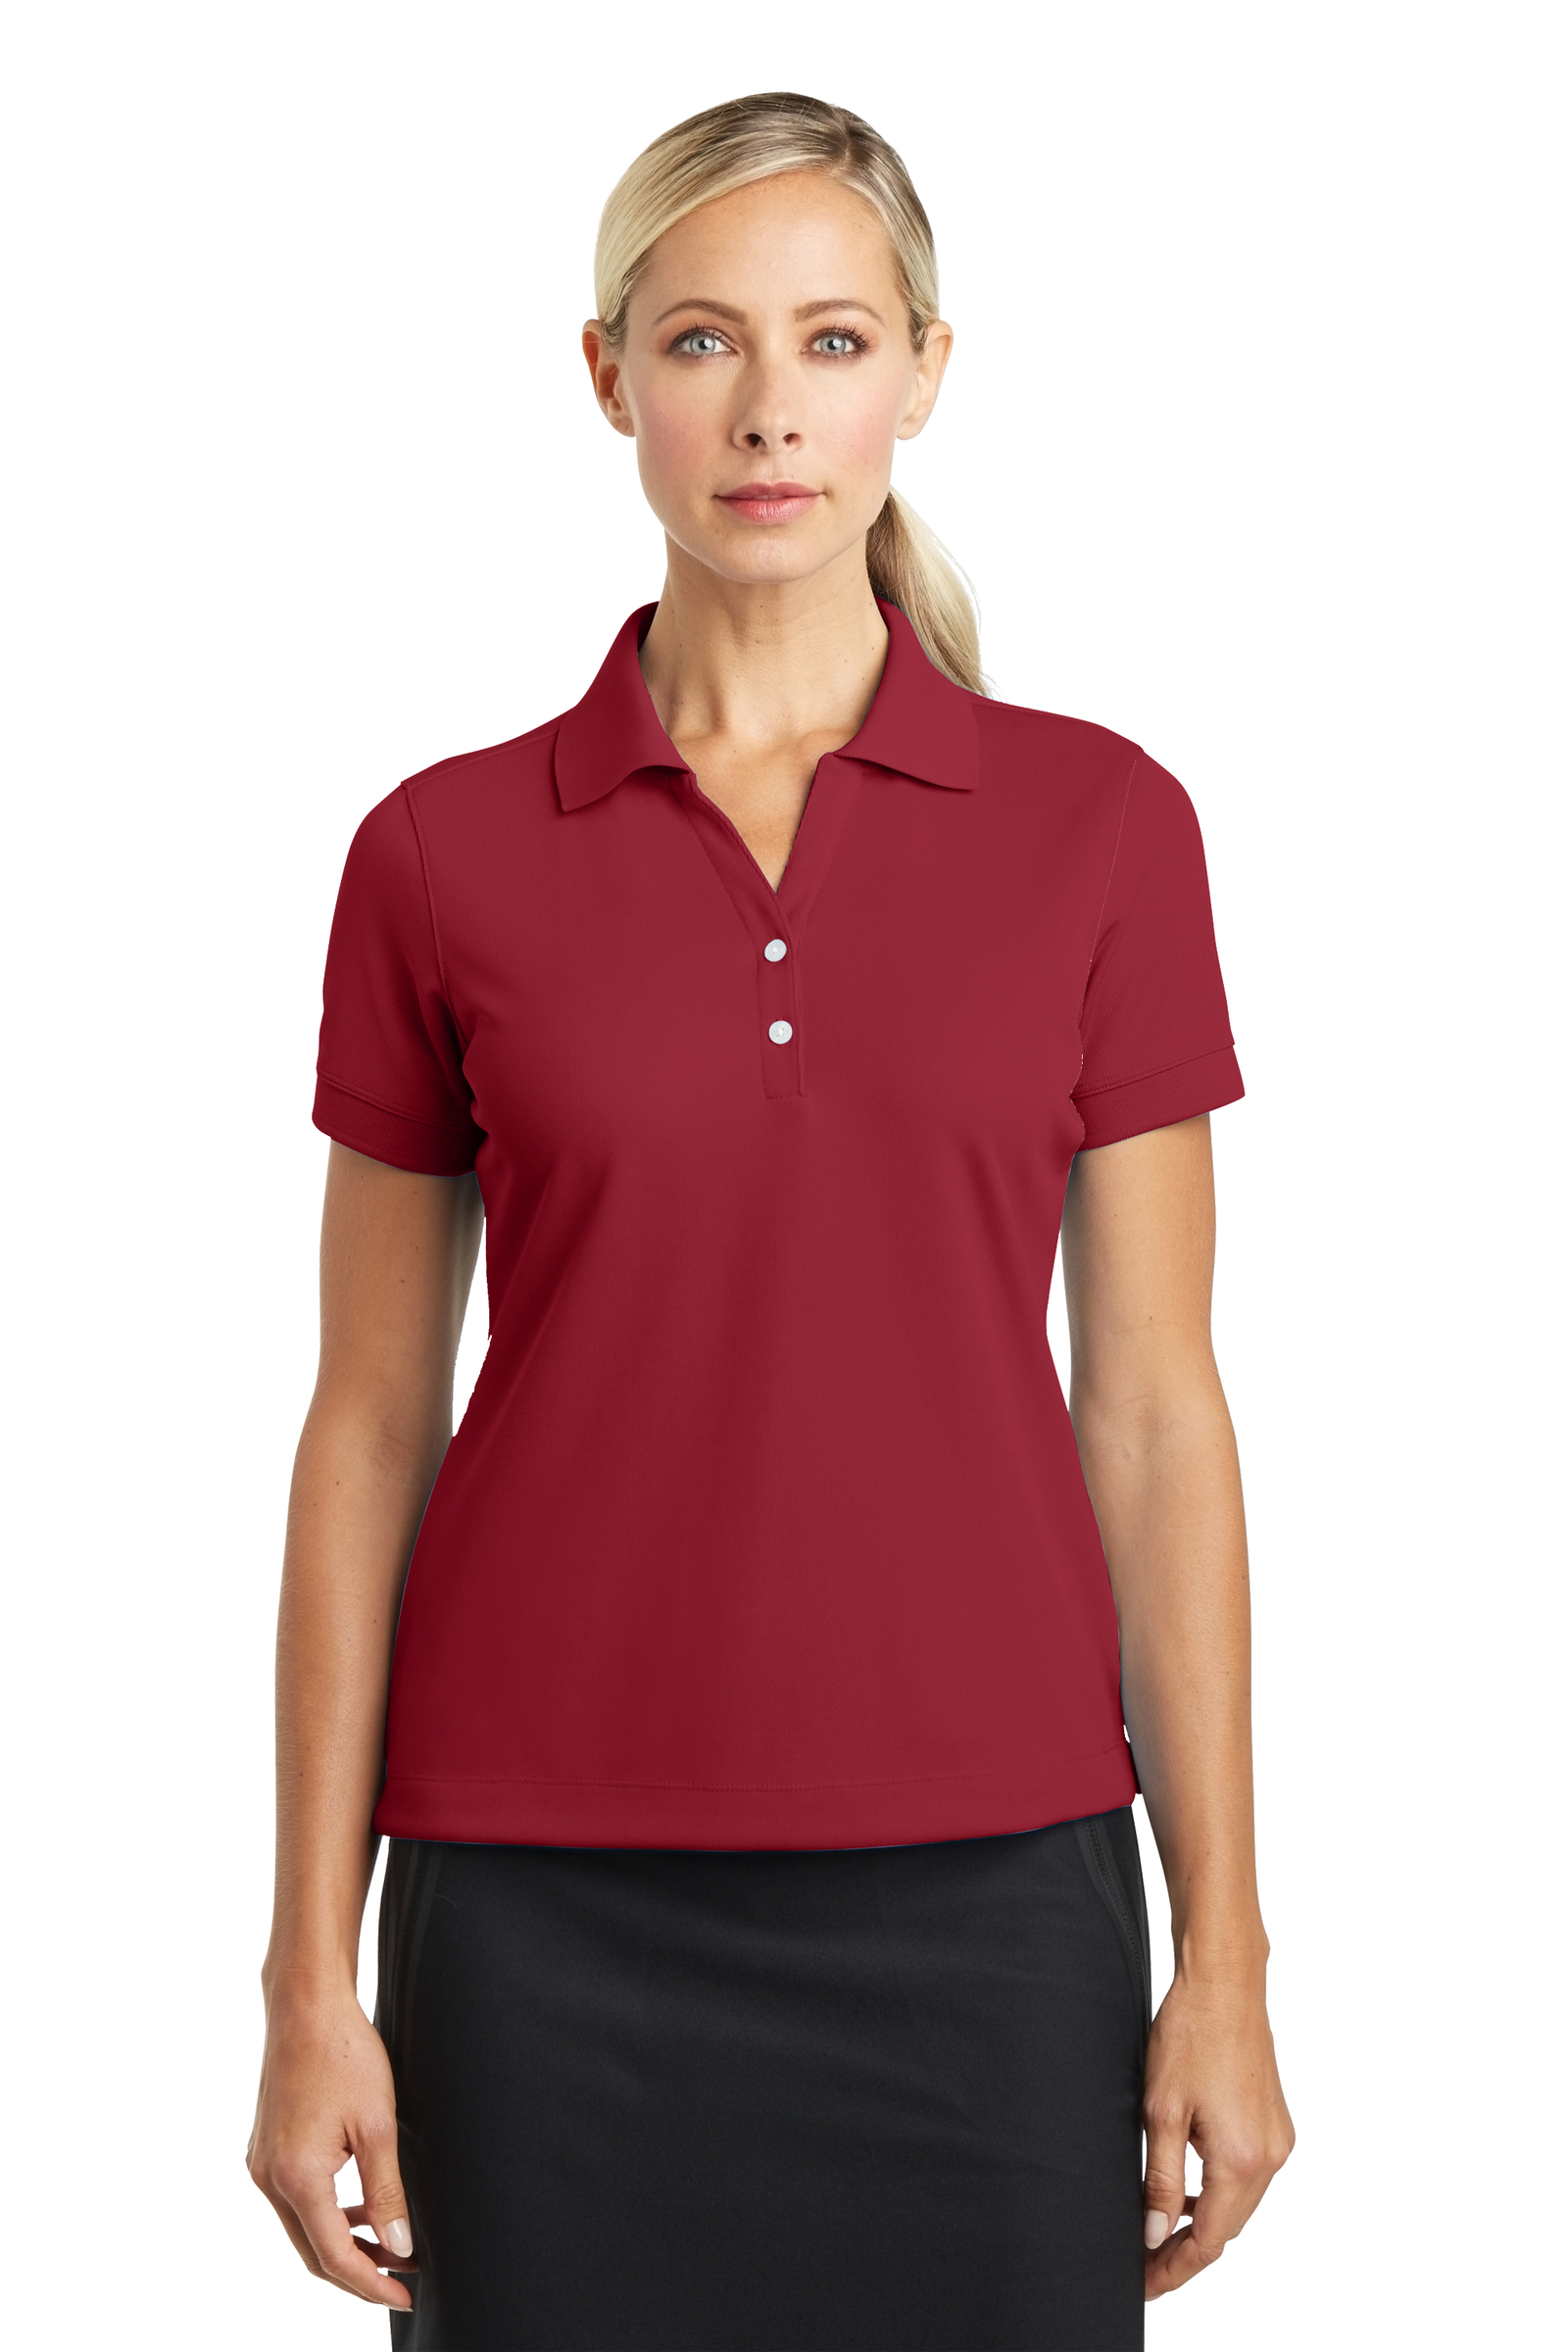 Nike Embroidered Women's Dri-FIT Classic Polo